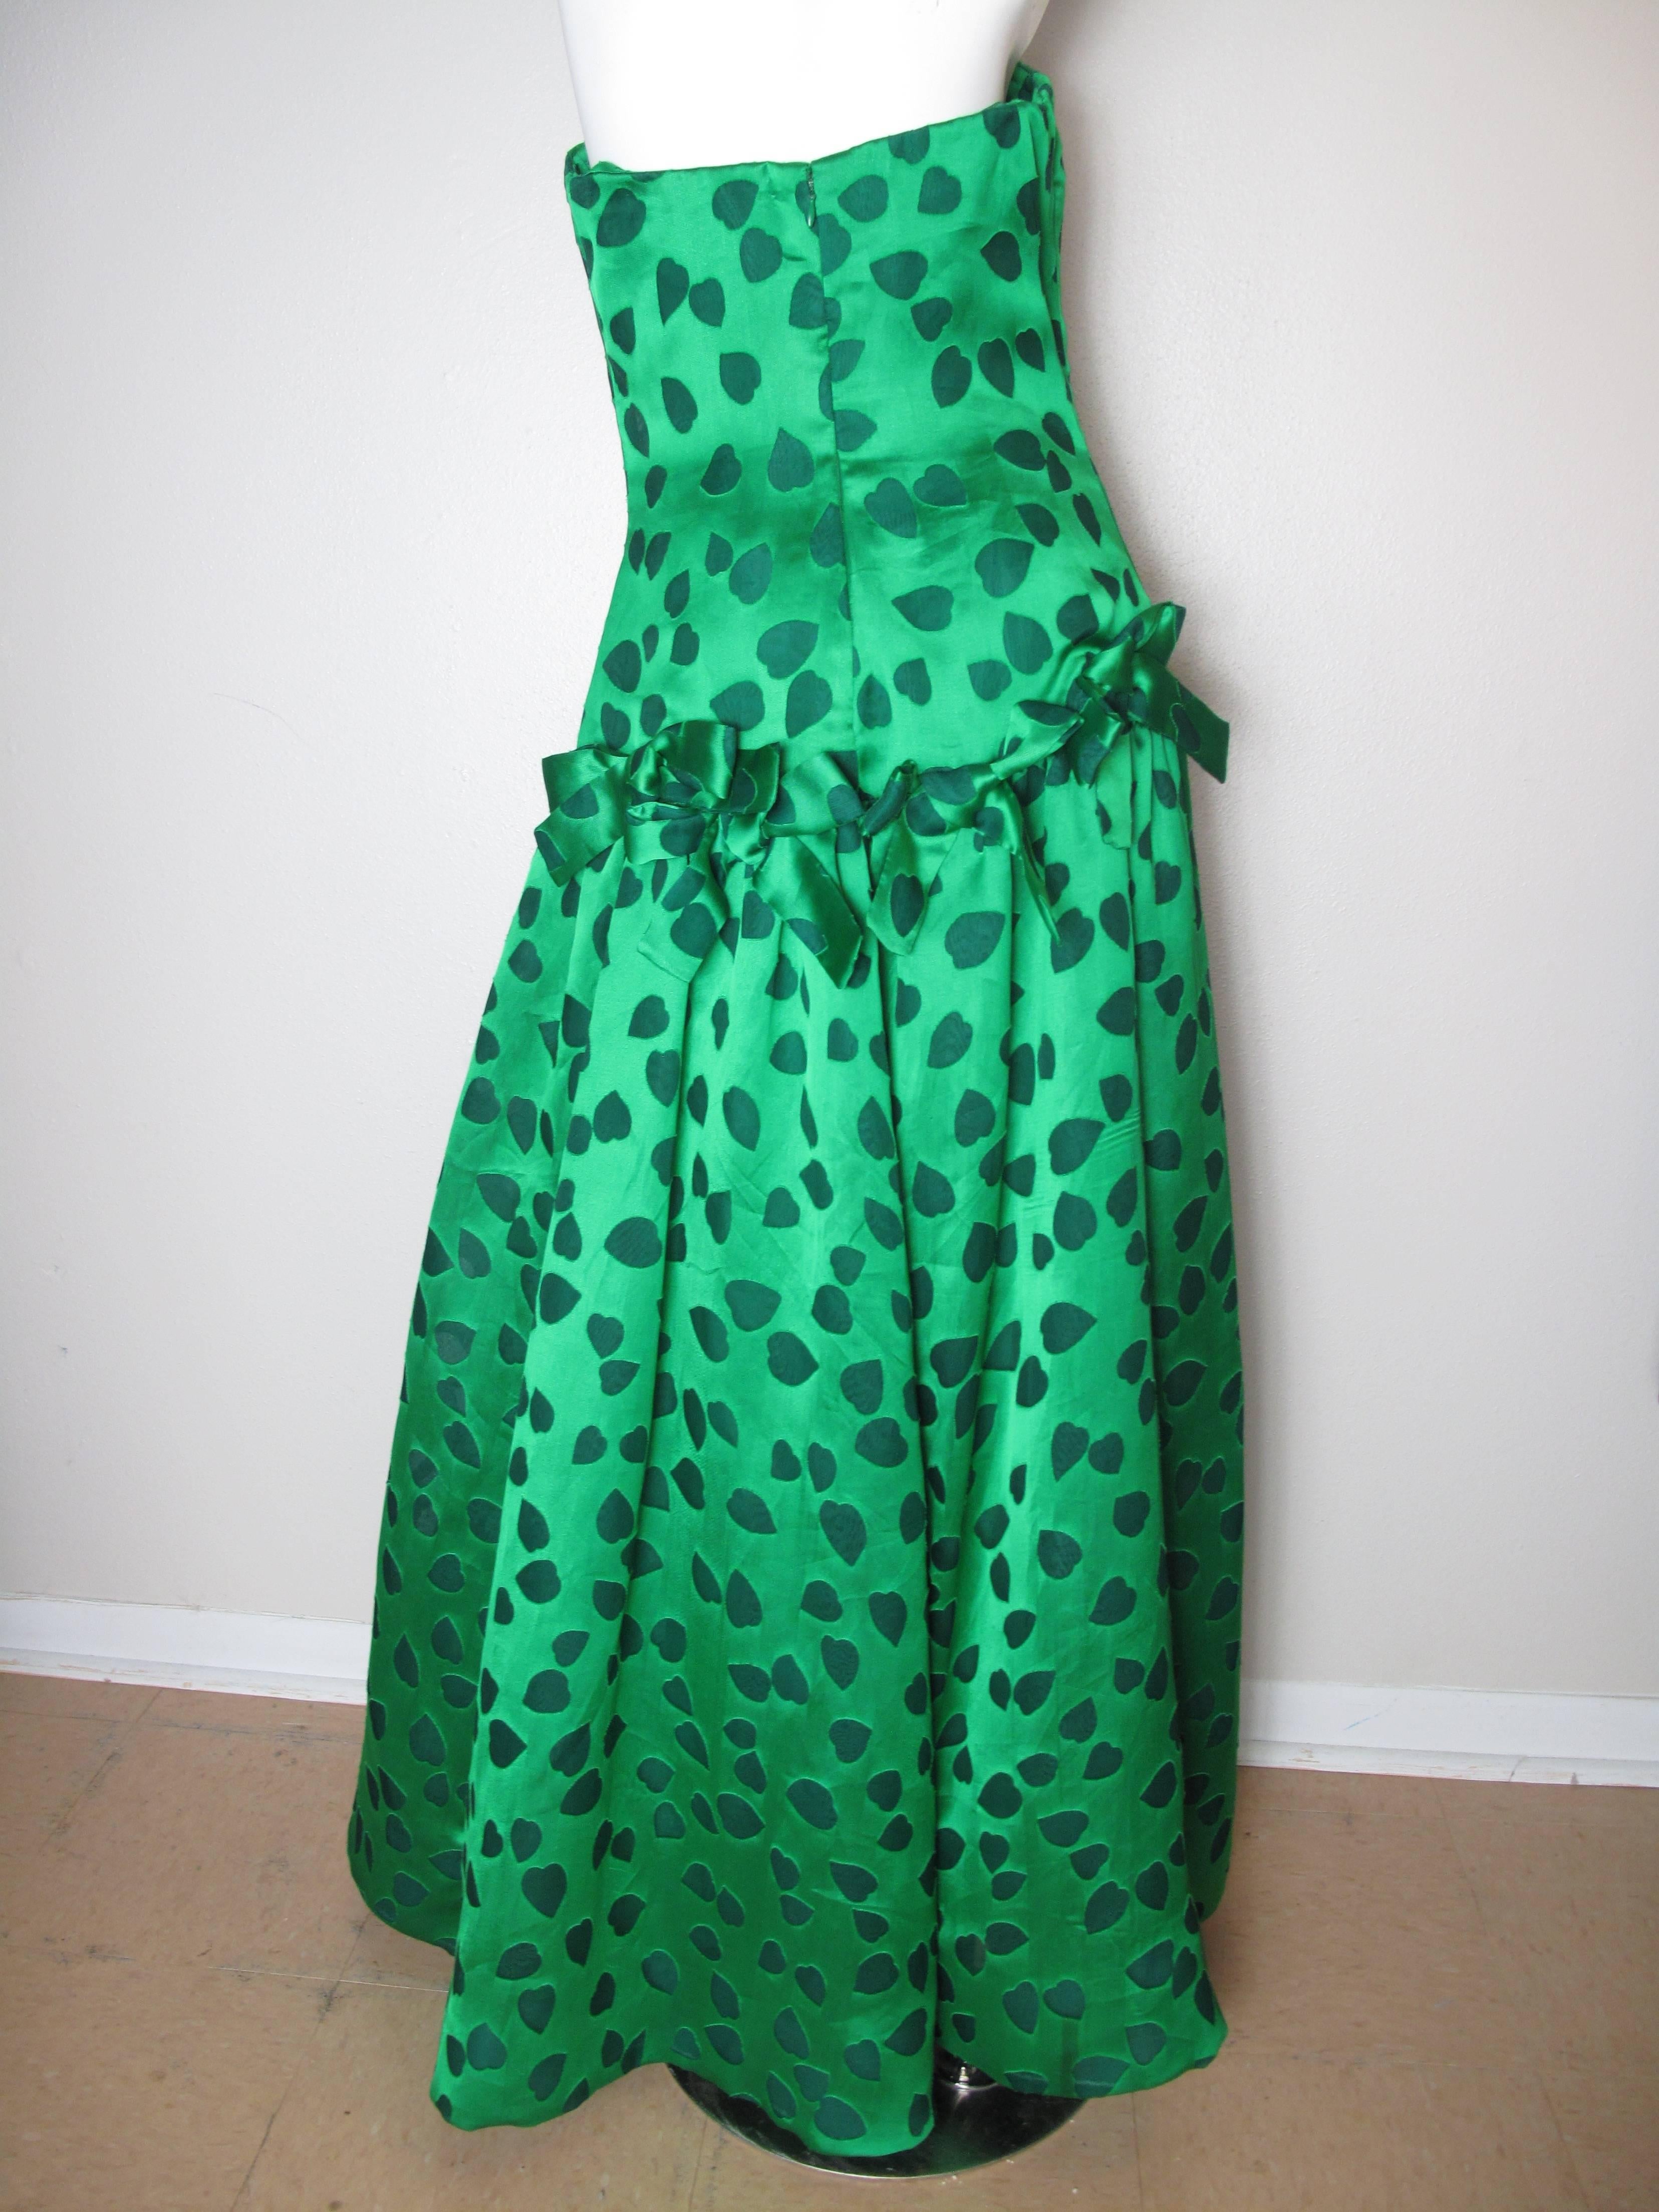 Scaasi green silk strapless gown with bow details at back. Size 10 - 12
Condition: very good

 We accept returns for refund, please see our terms.  We offer free Ground shipping within the US.  Please let us know if you have any questions. 